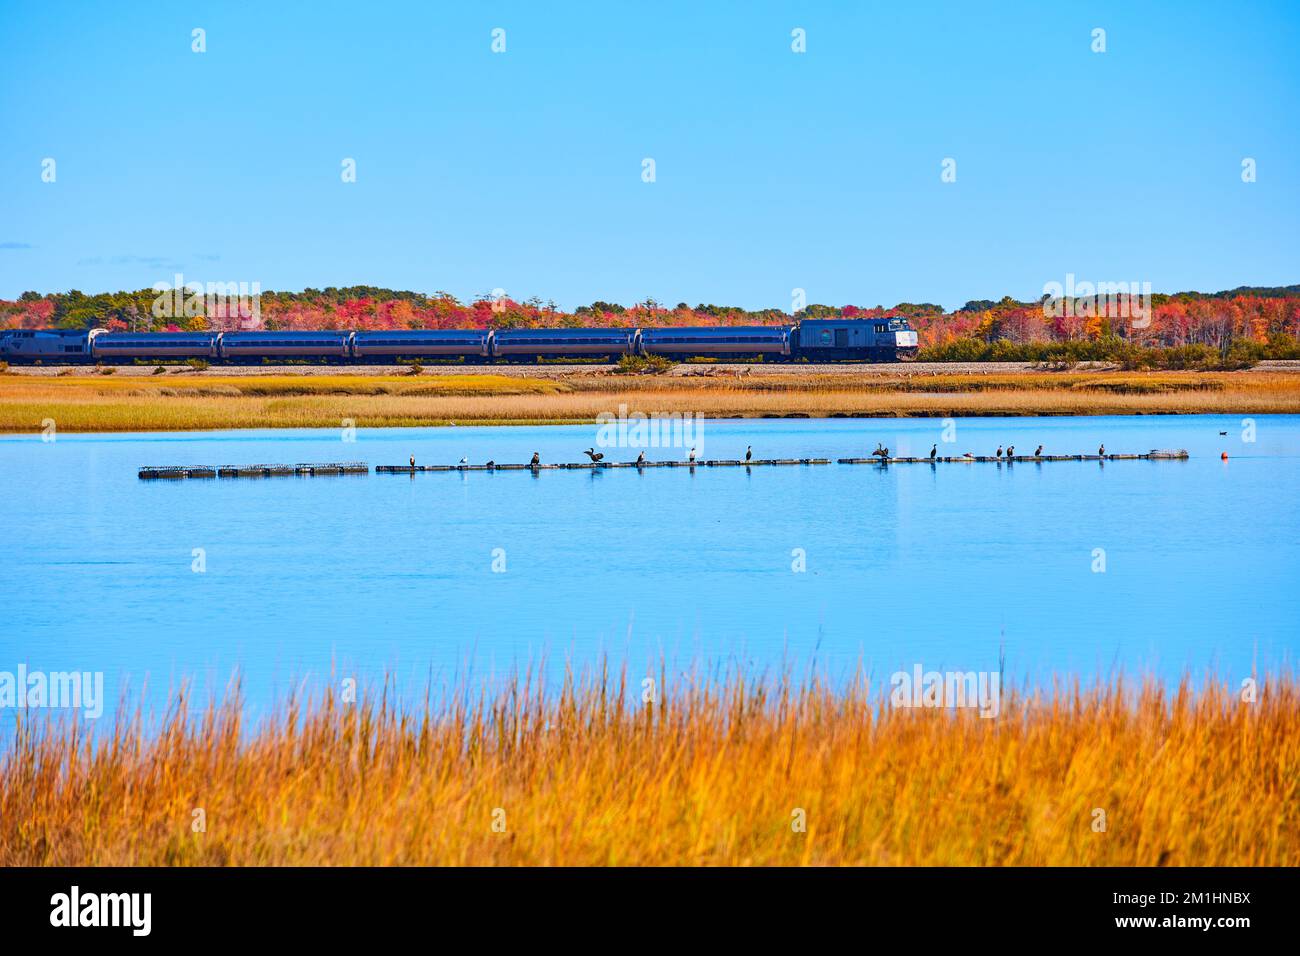 Amtrak train going through marshes in Maine with birds on floating sticks Stock Photo